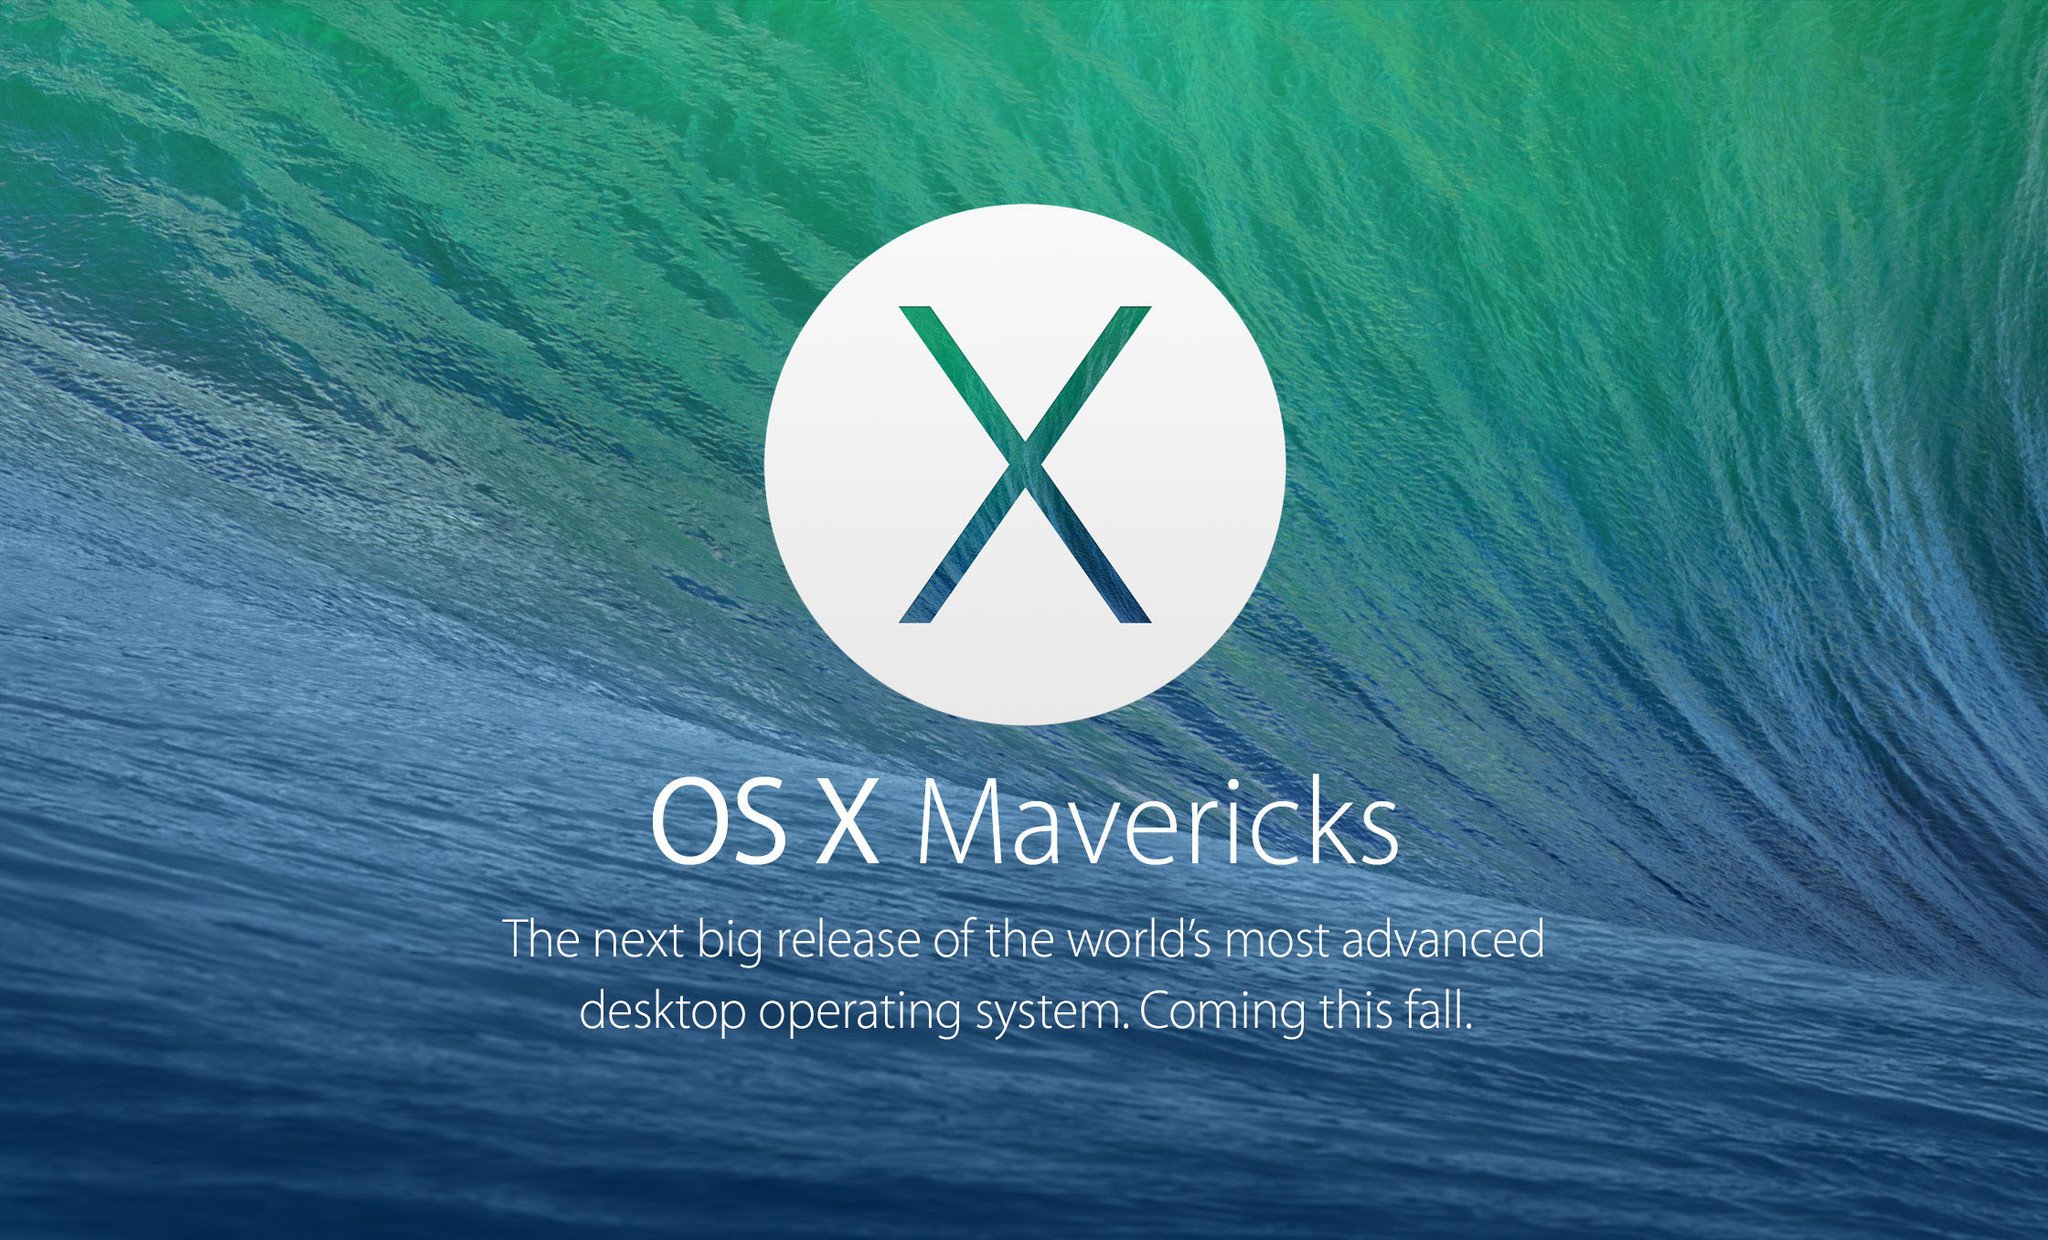 Is your Mac ready for Mavericks? Find out here